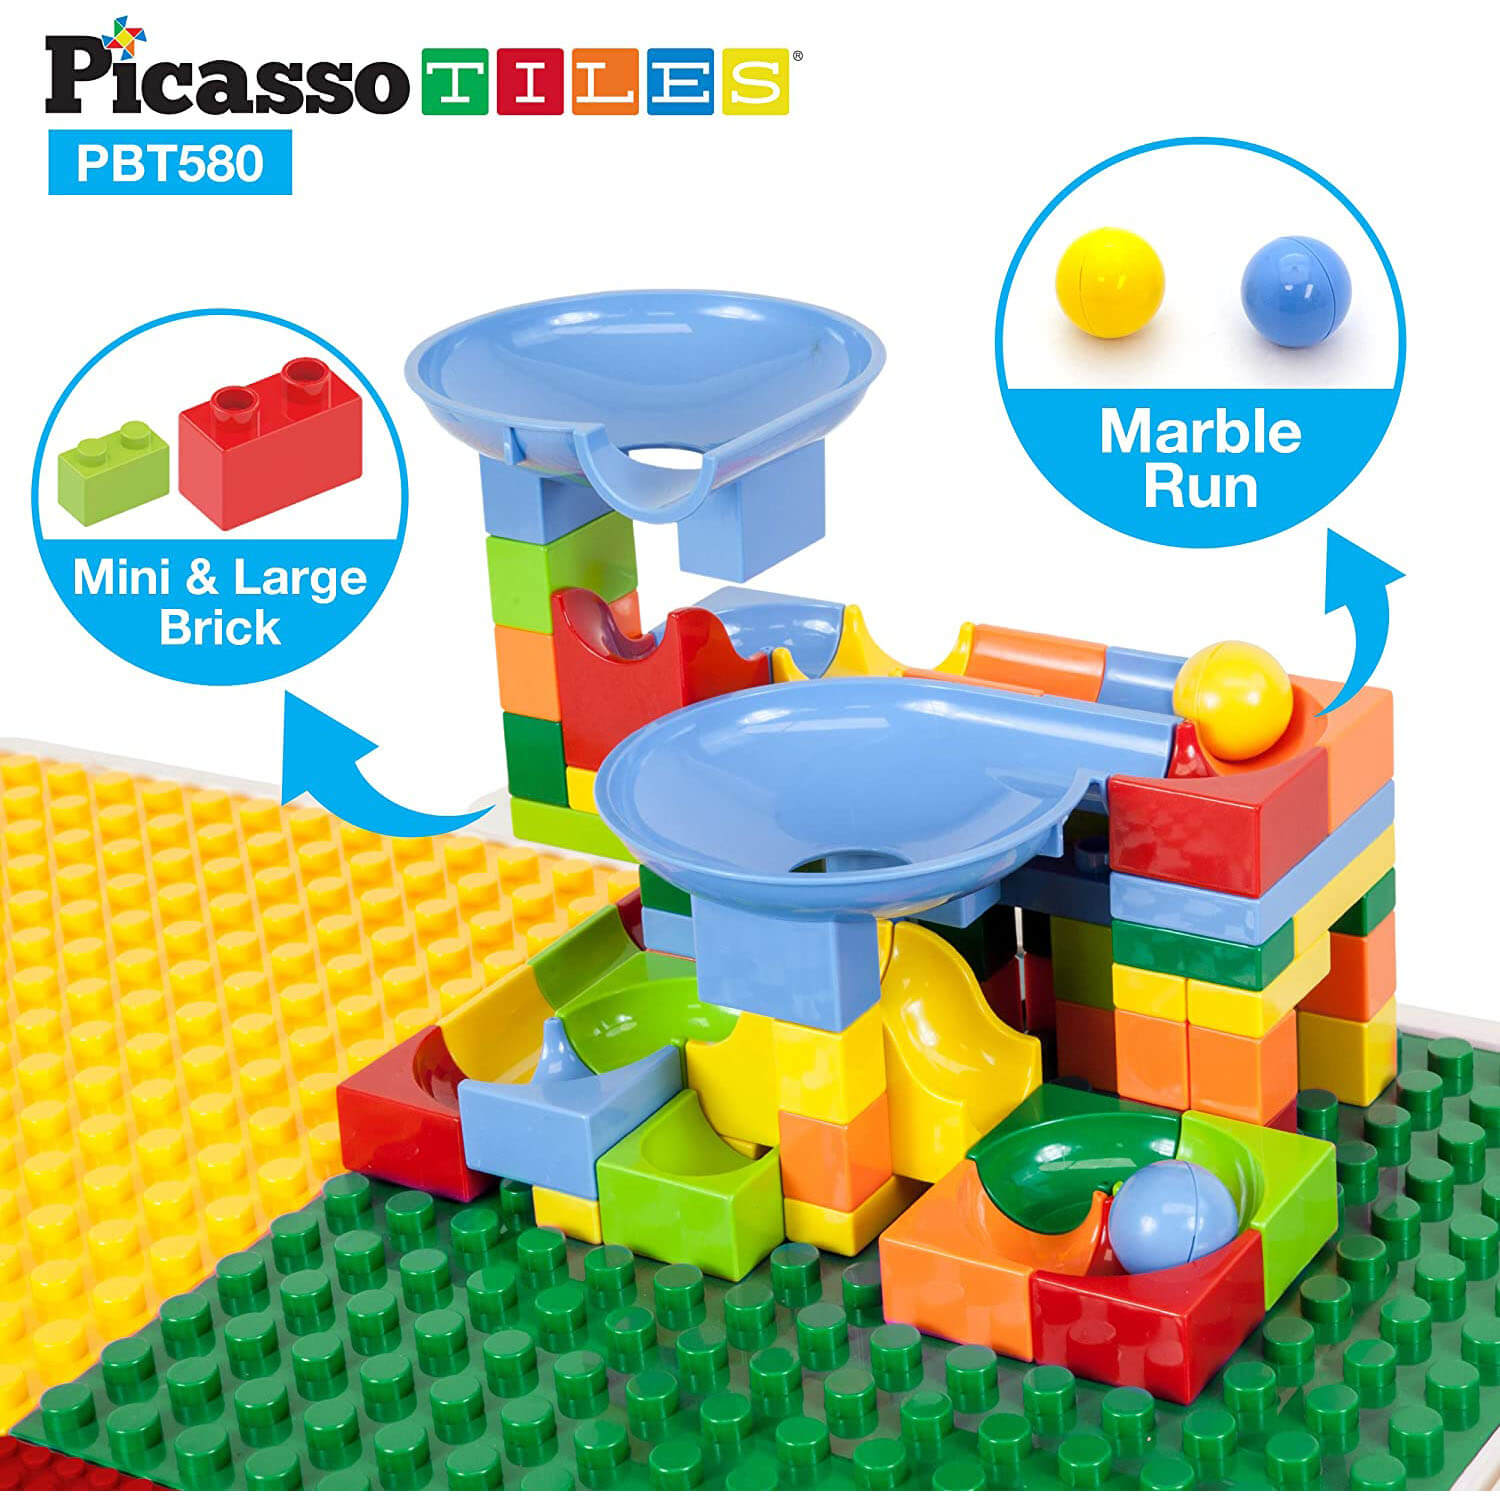 PicassoTiles Storage Activity Table with Blocks, Bricks and Marble Run 530 Piece Set